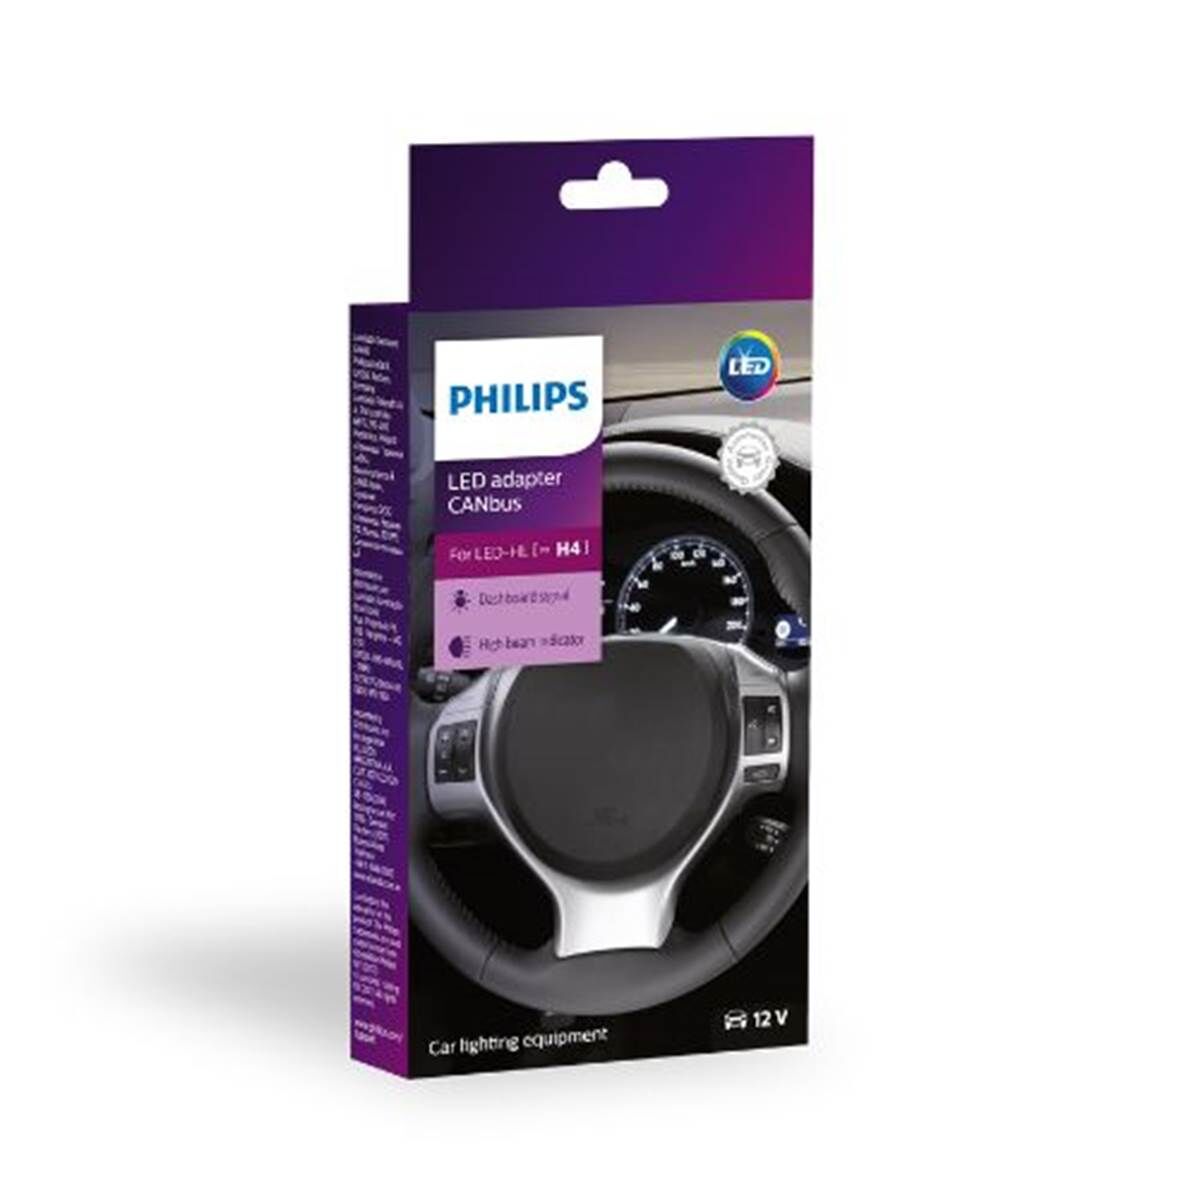 Philips Adaptador canbus h4 led  (2ud)